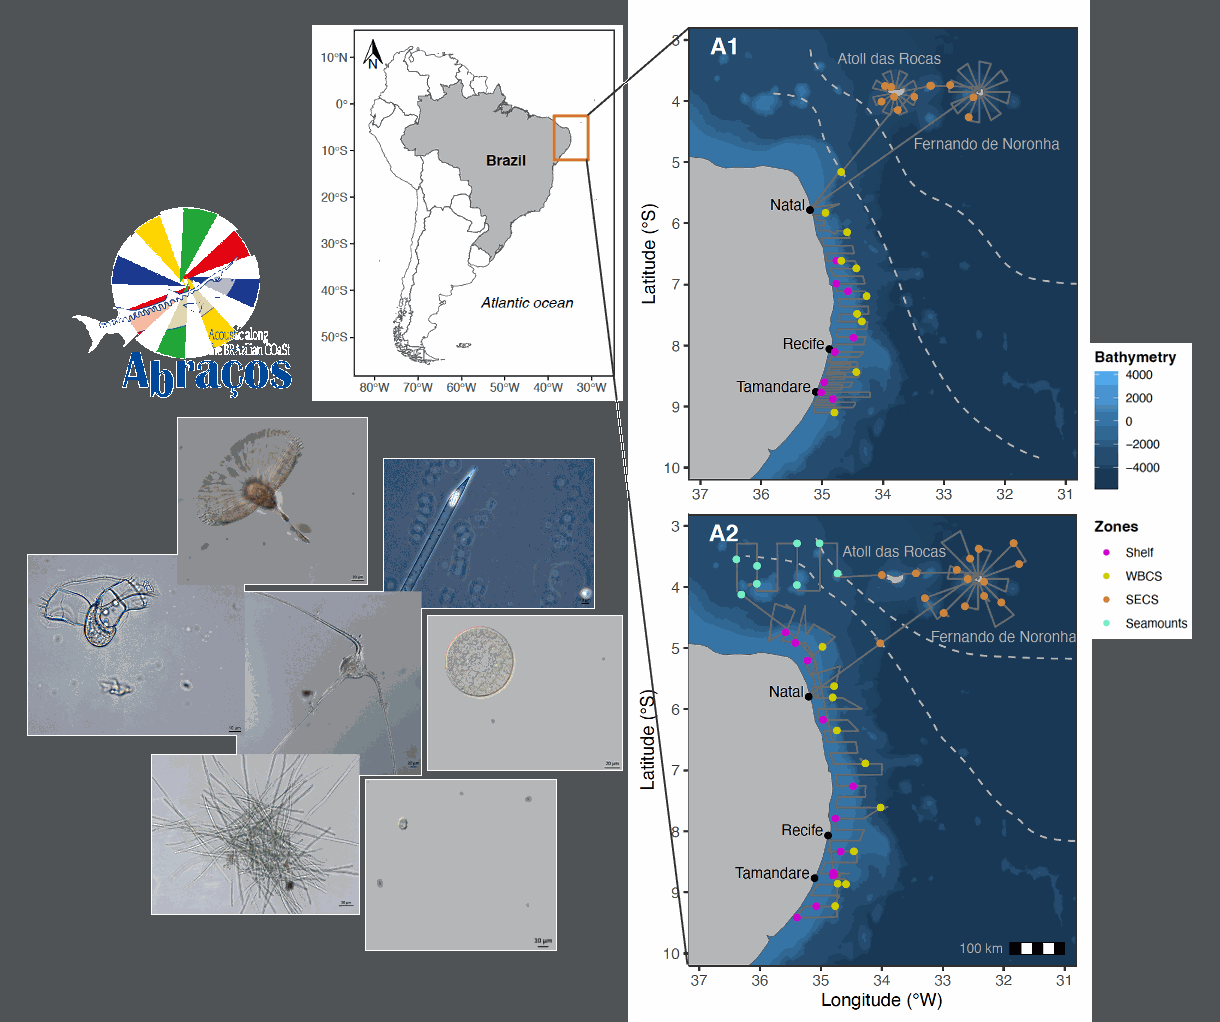 Nano- and Microphytoplankton diversity data collected during the ABRACOS 1 and 2 surveys performed along the Northeast Brazil continental shelf, slope and open ocean